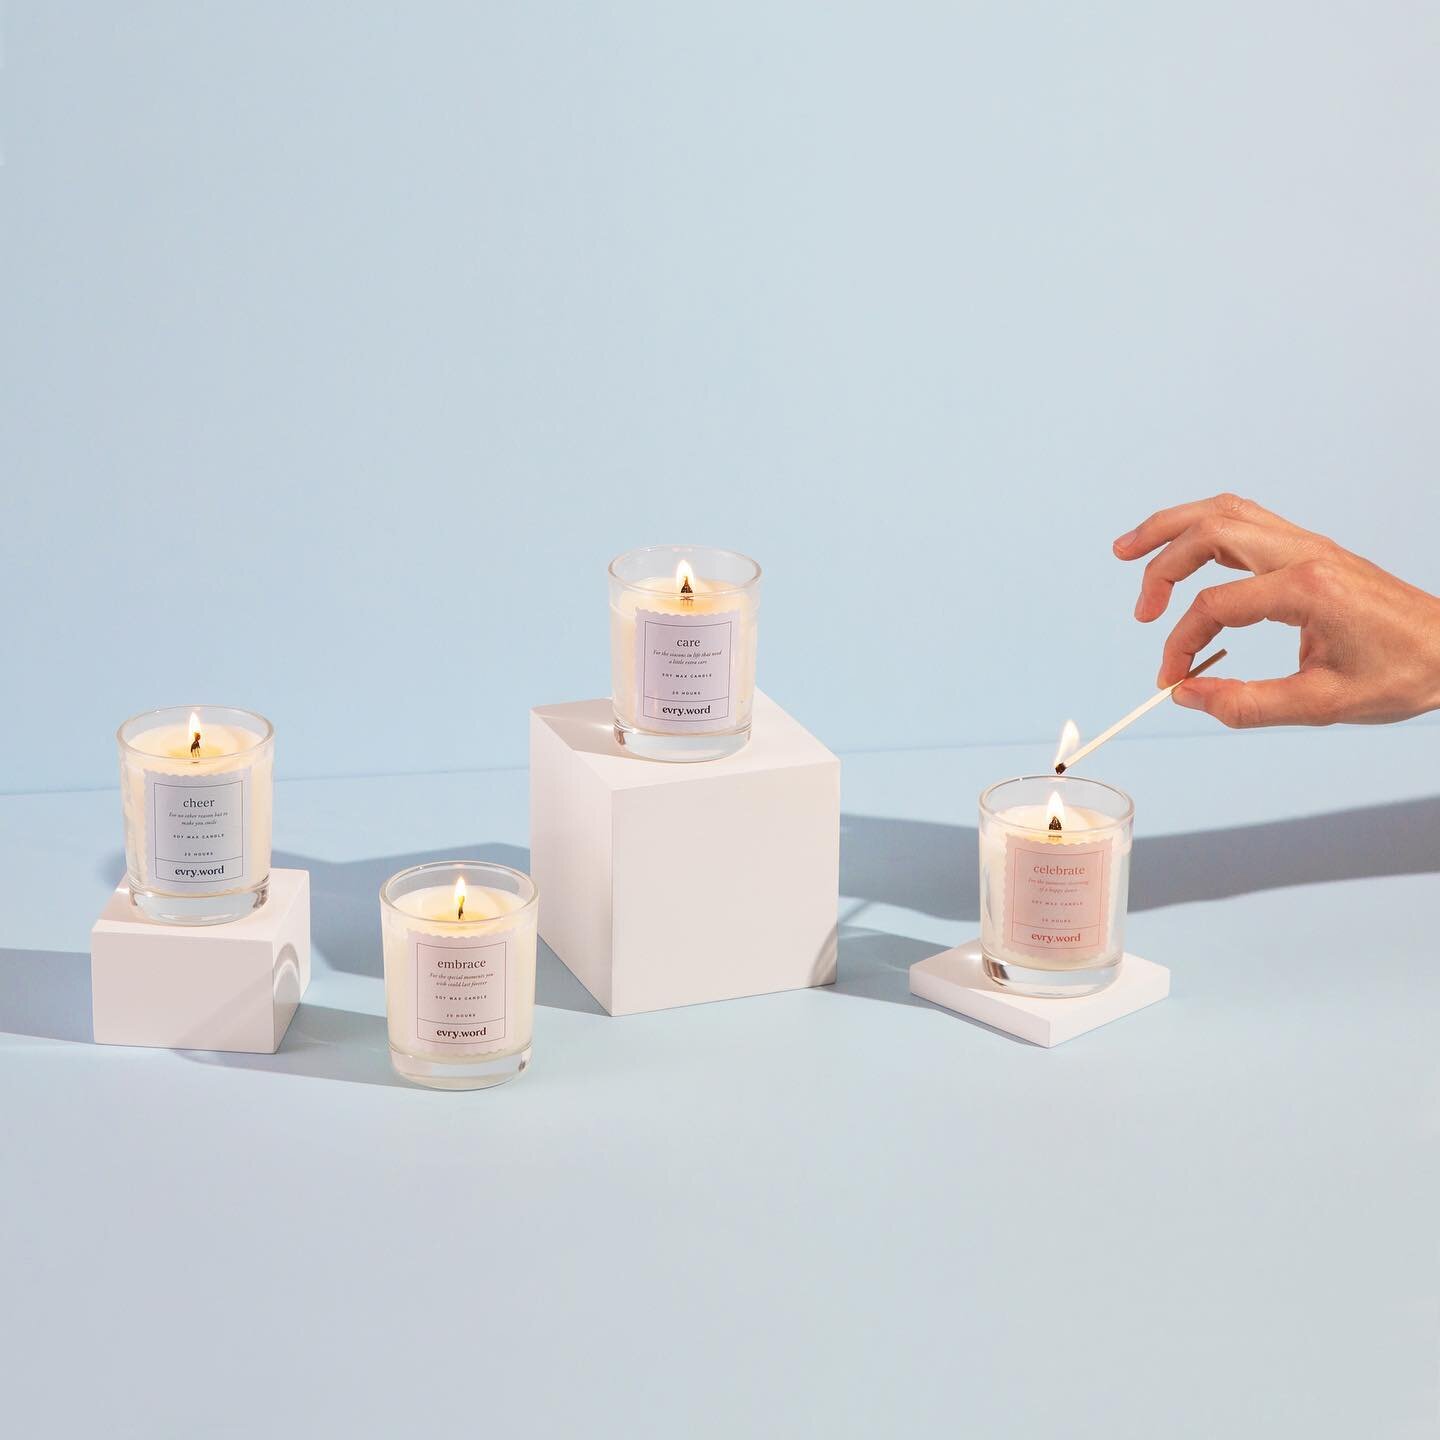 Love notes just got lit🔥

We just love the idea behind this beautiful new brand @evry.word, send a message in a candle and watch it reveal as it burns. How cute is that?

Launch product photography by yours truly🙋&zwj;♀️

Design by @studio.wednesda